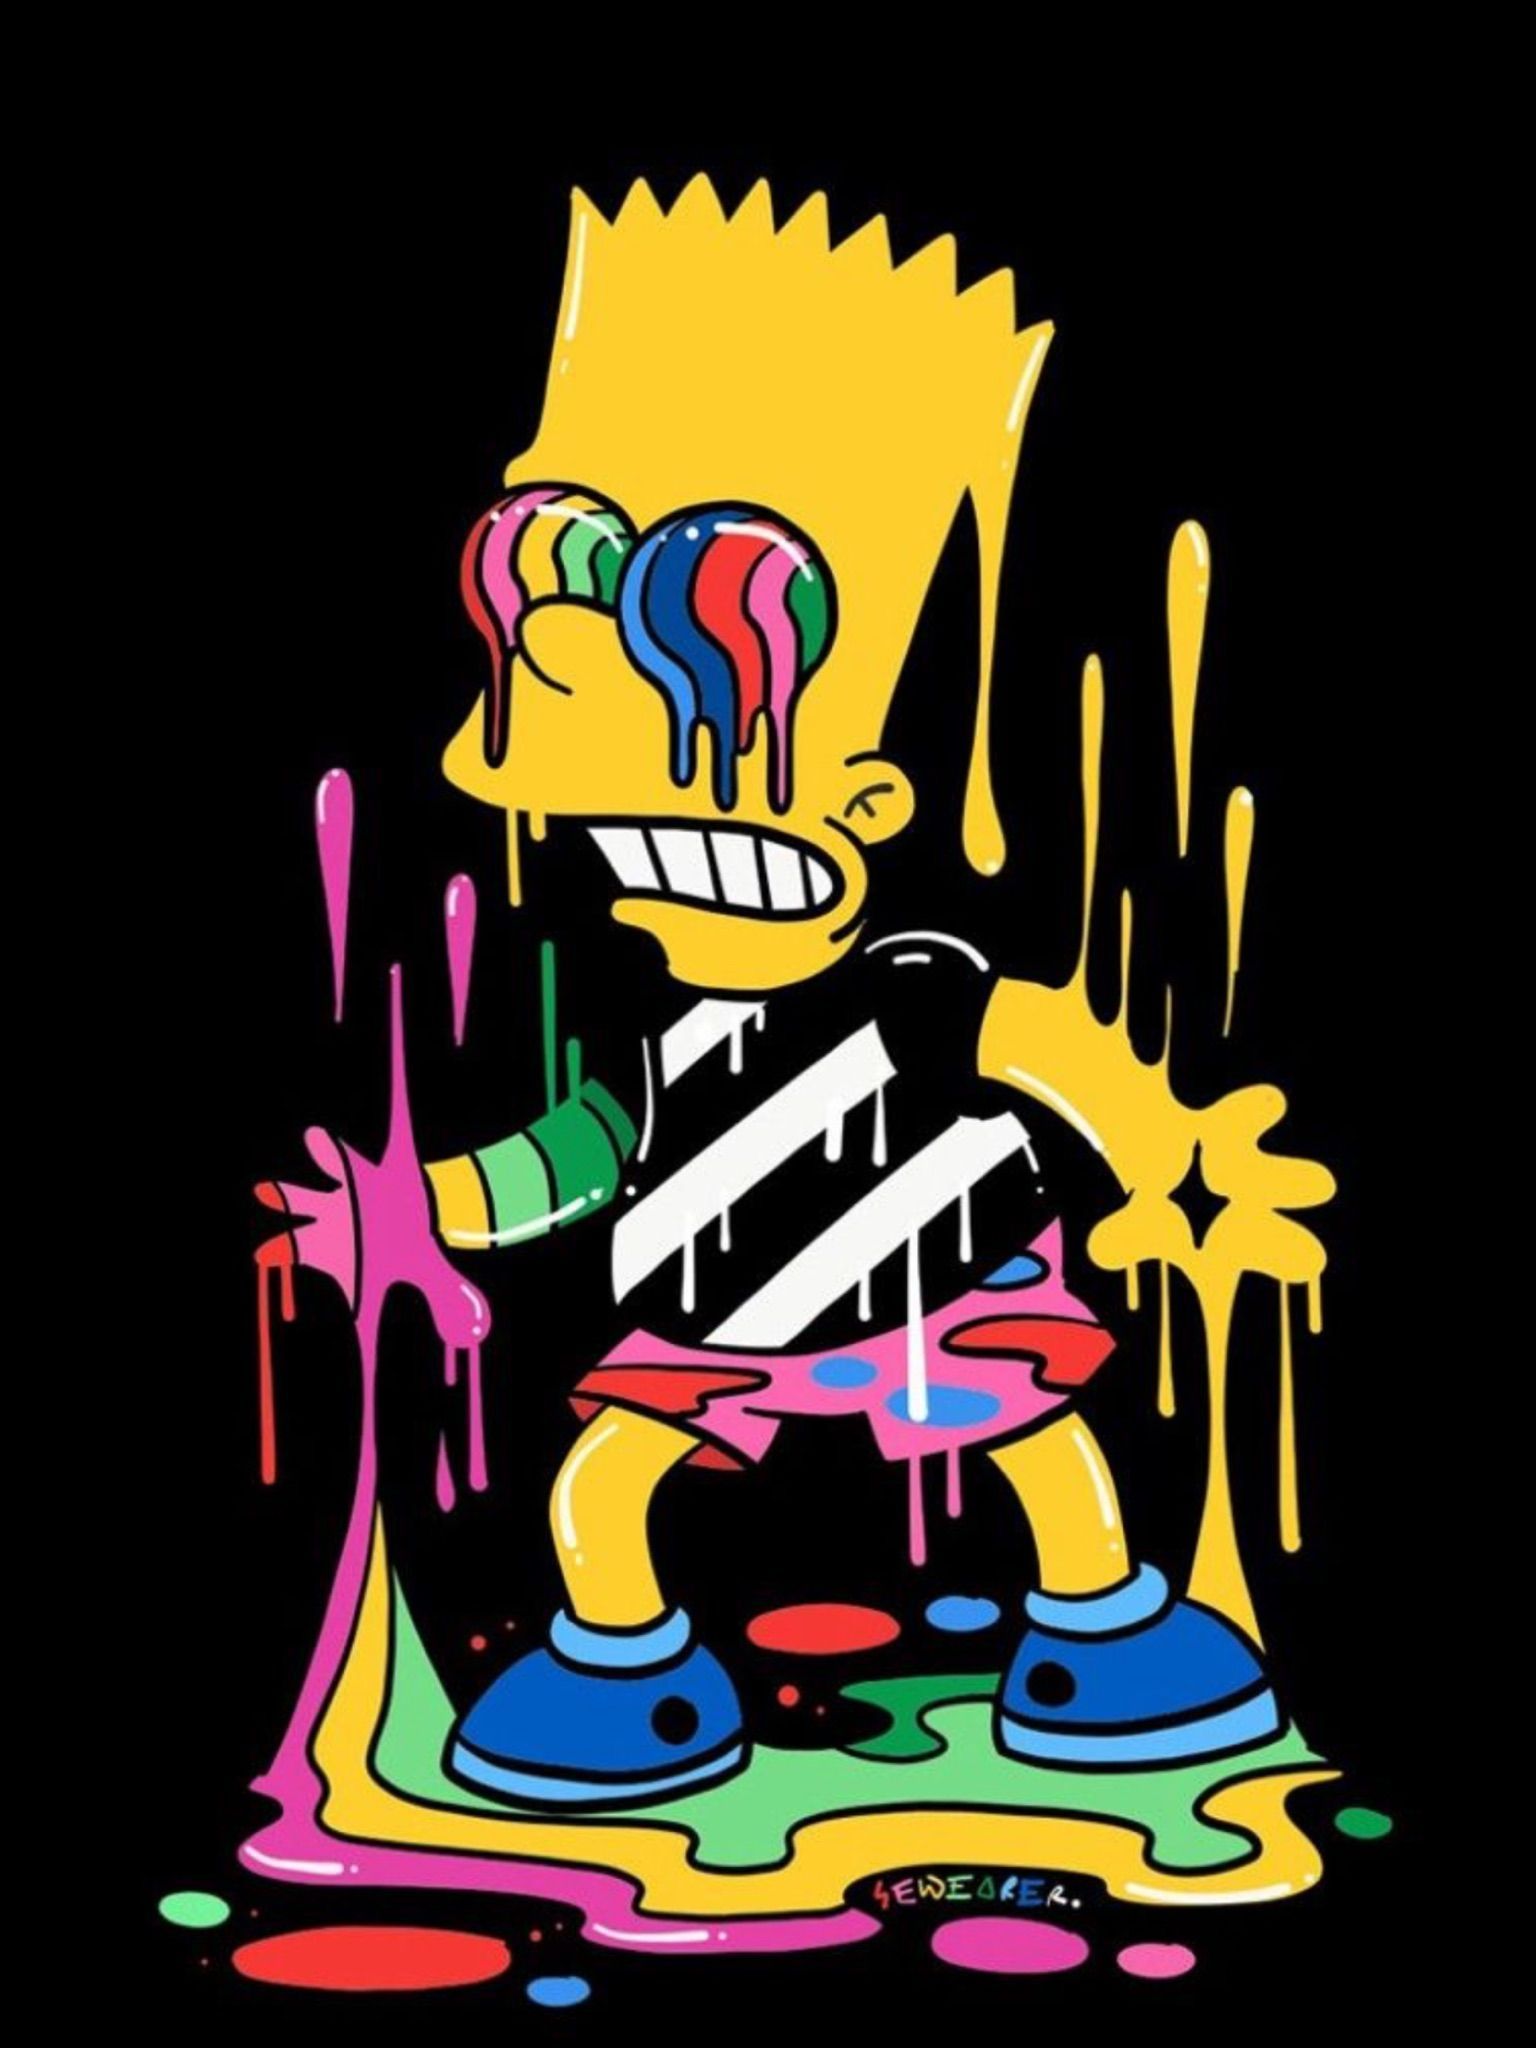 The simpsons character is standing in front of a black background with paint - The Simpsons, Bart Simpson